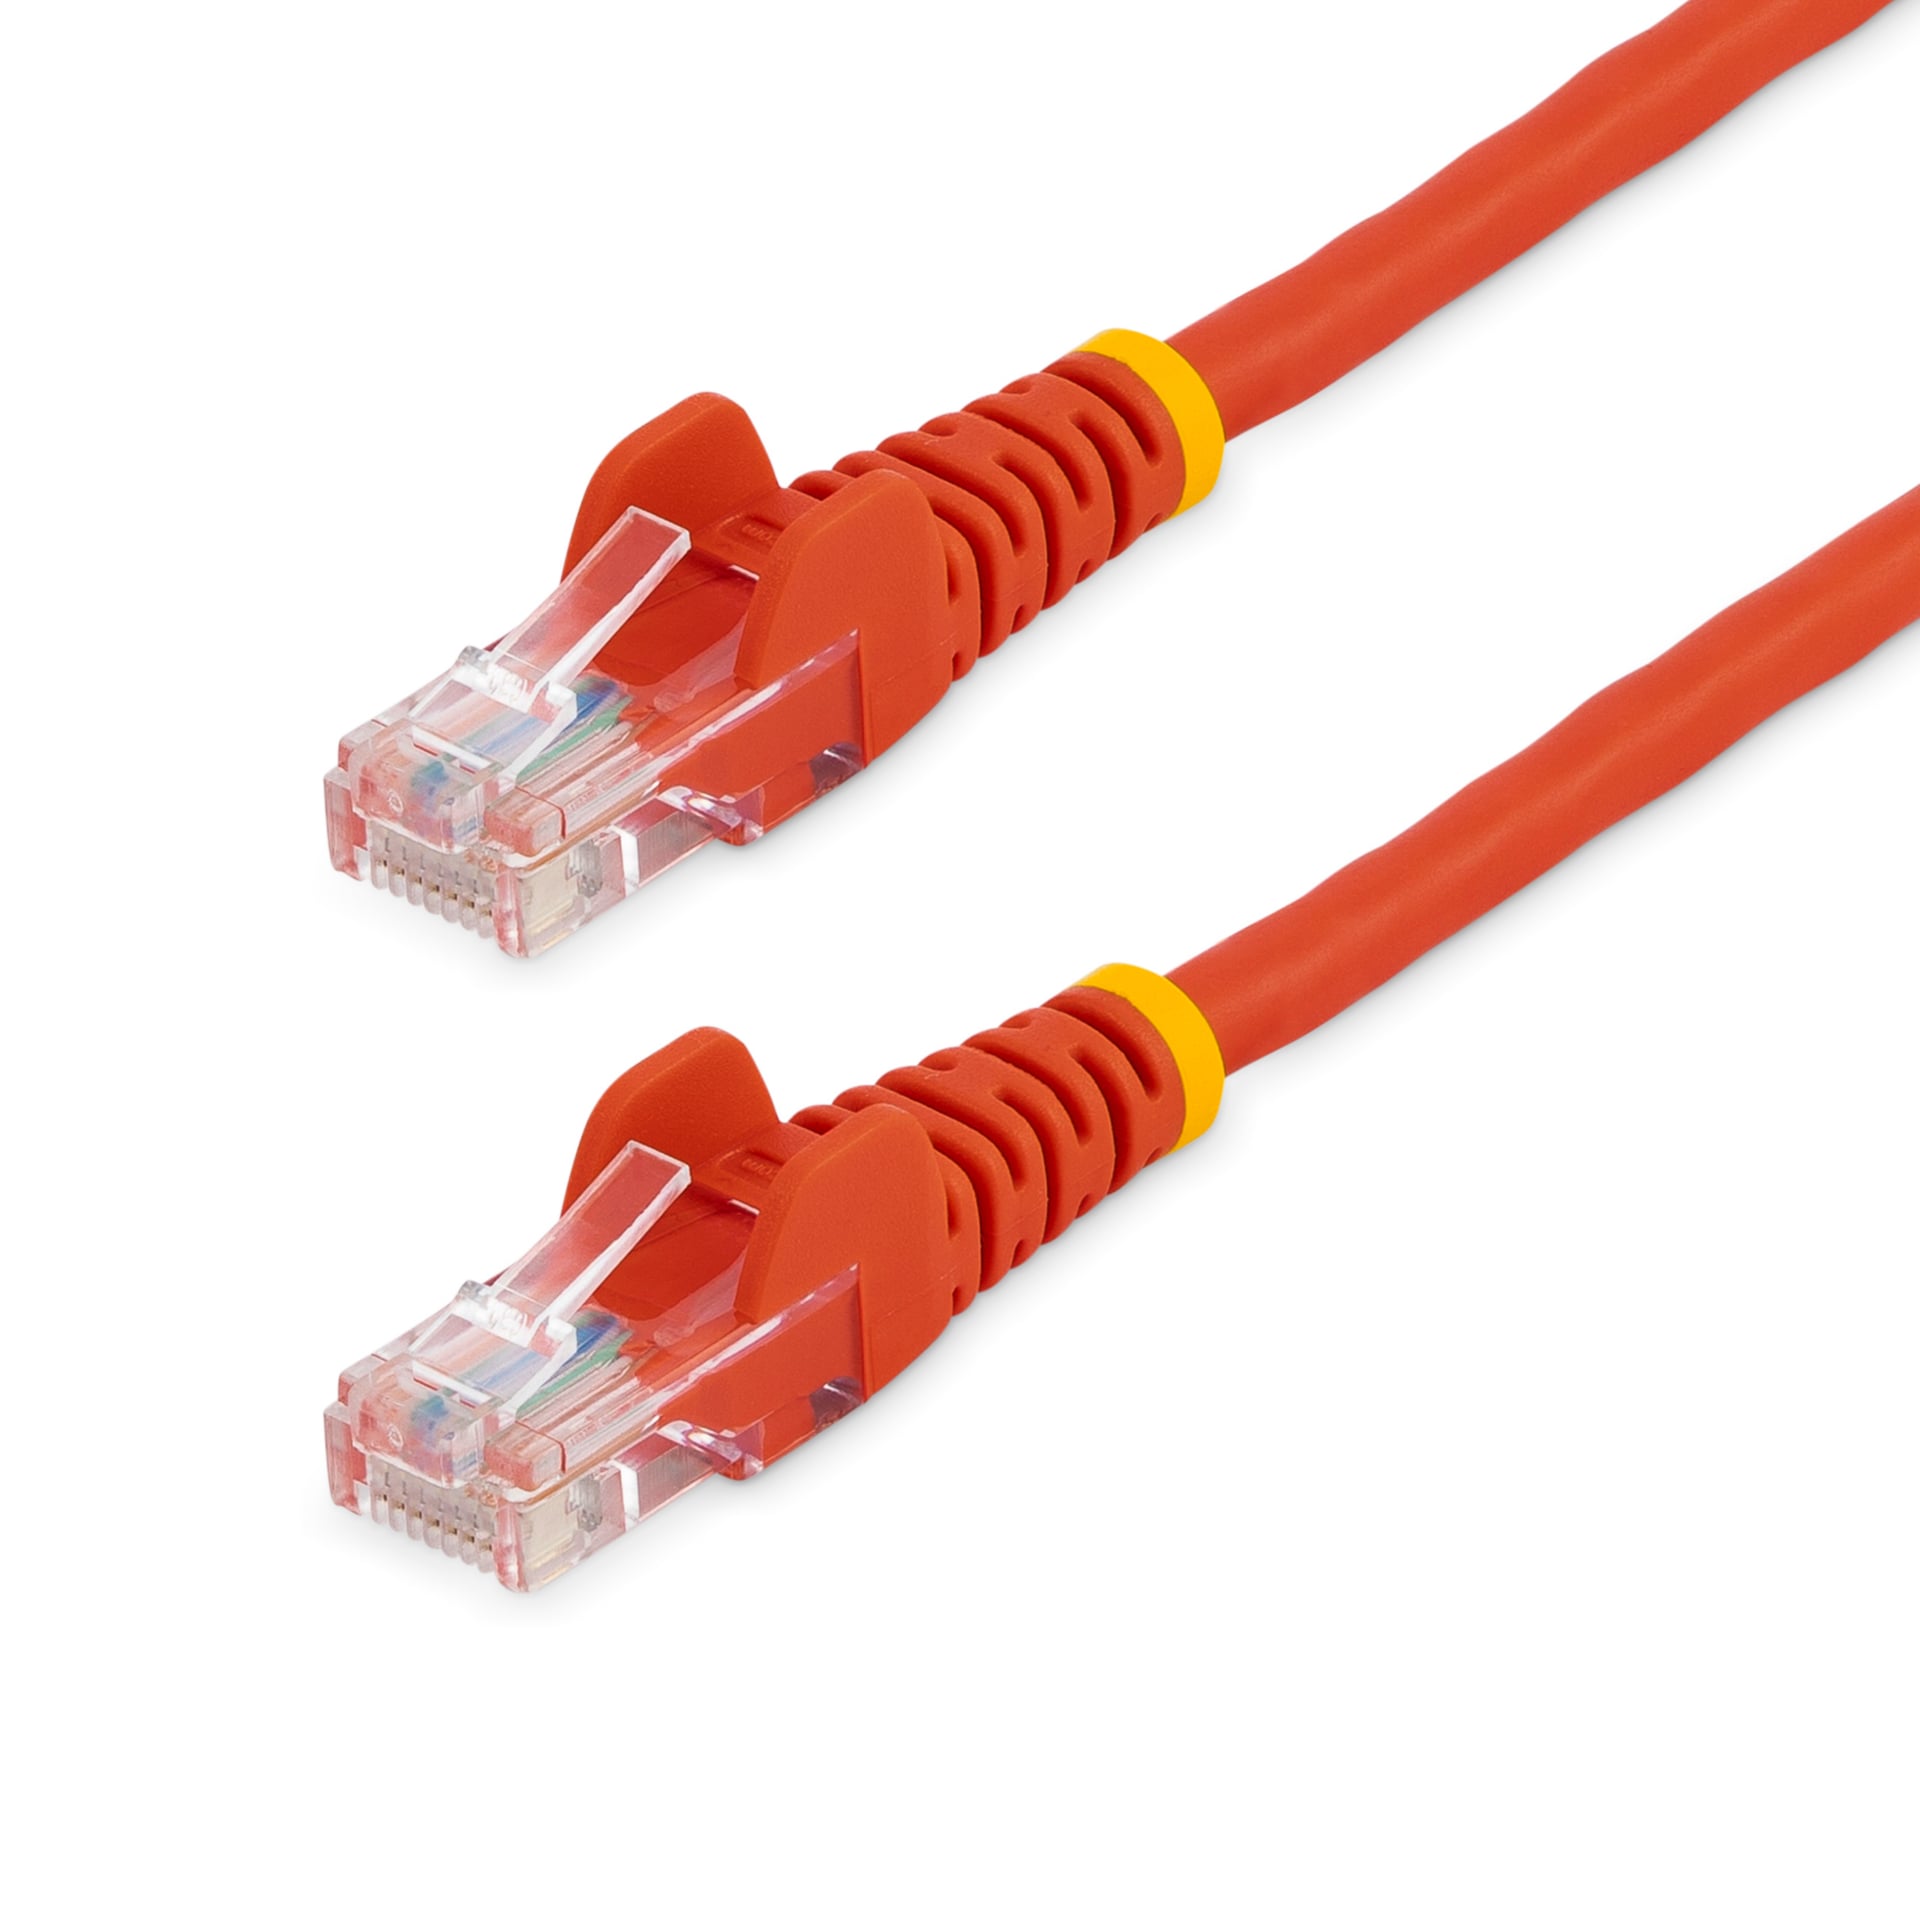 StarTech.com Cat5e Ethernet Cable 2 ft Red - Cat 5e Snagless Patch Cable